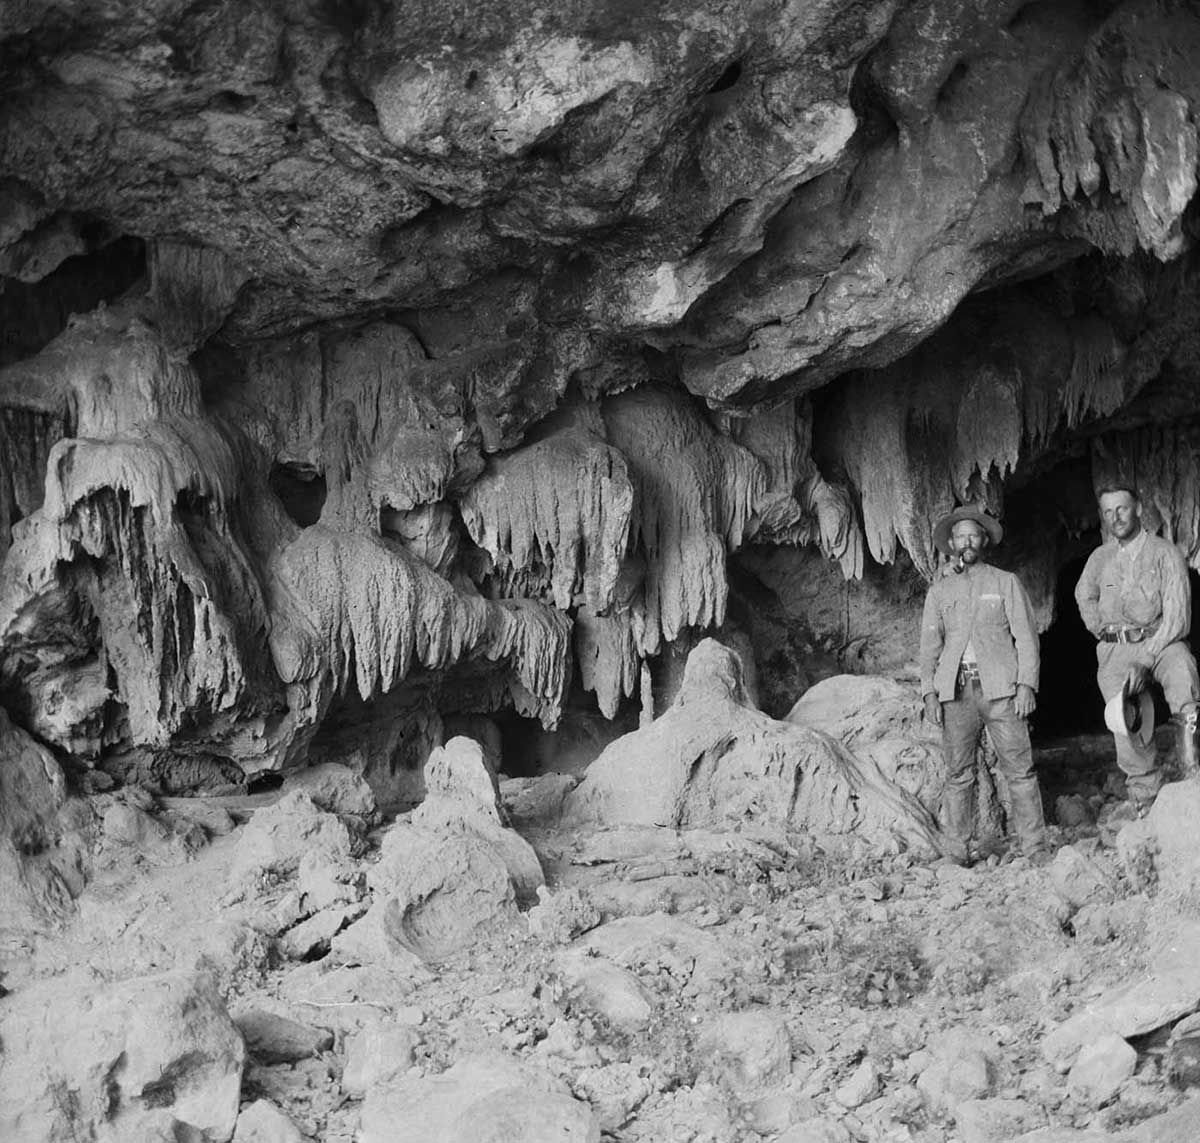 Two non-Aboriginal men standing at the entrance to Wangalinnya Caves, Napier Range, Western Australia 1916. The cave entrance is made up of fantastic rock formations rising from the ground and hanging from the entrance roof. The formations hang in frond-like formations or appear to grow from the ground. The two men stand to the far right of the image.